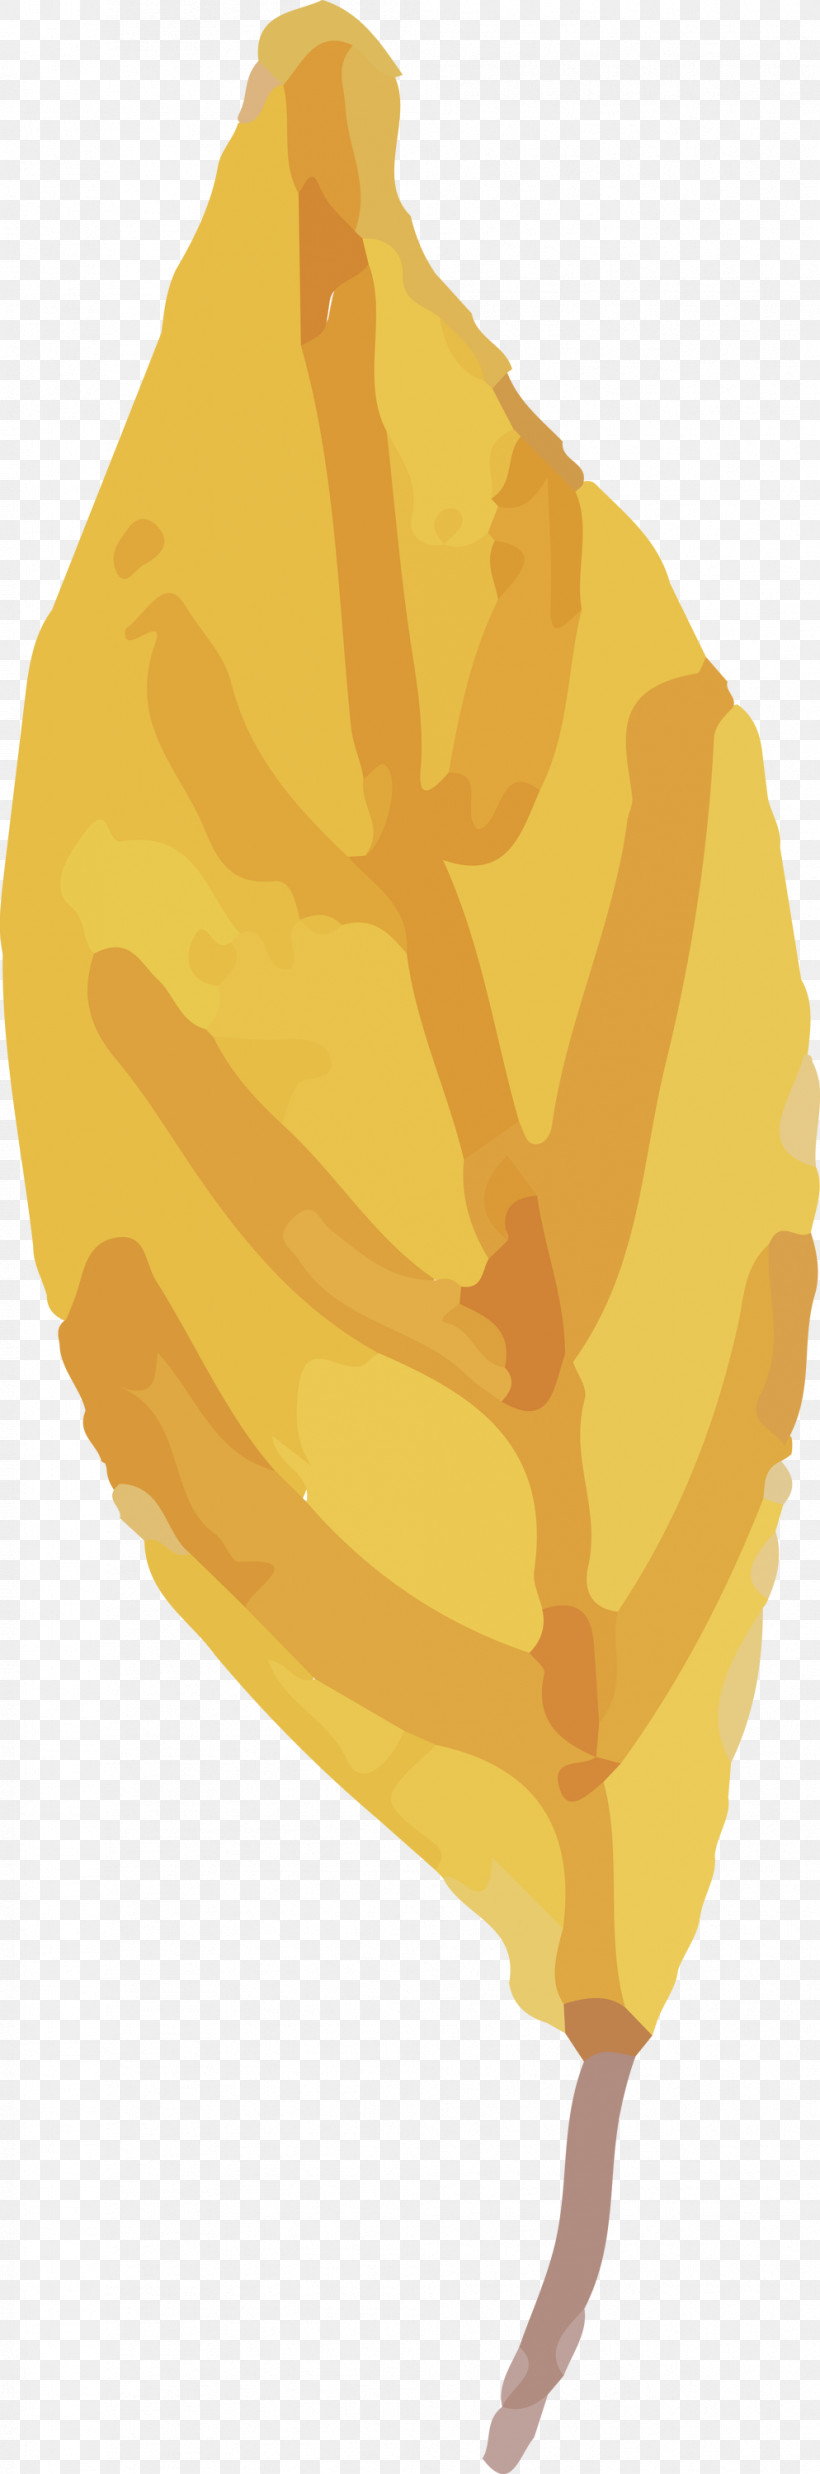 Leaf Yellow Commodity Fruit Biology, PNG, 994x3000px, Watercolor Autumn, Biology, Commodity, Fruit, Leaf Download Free